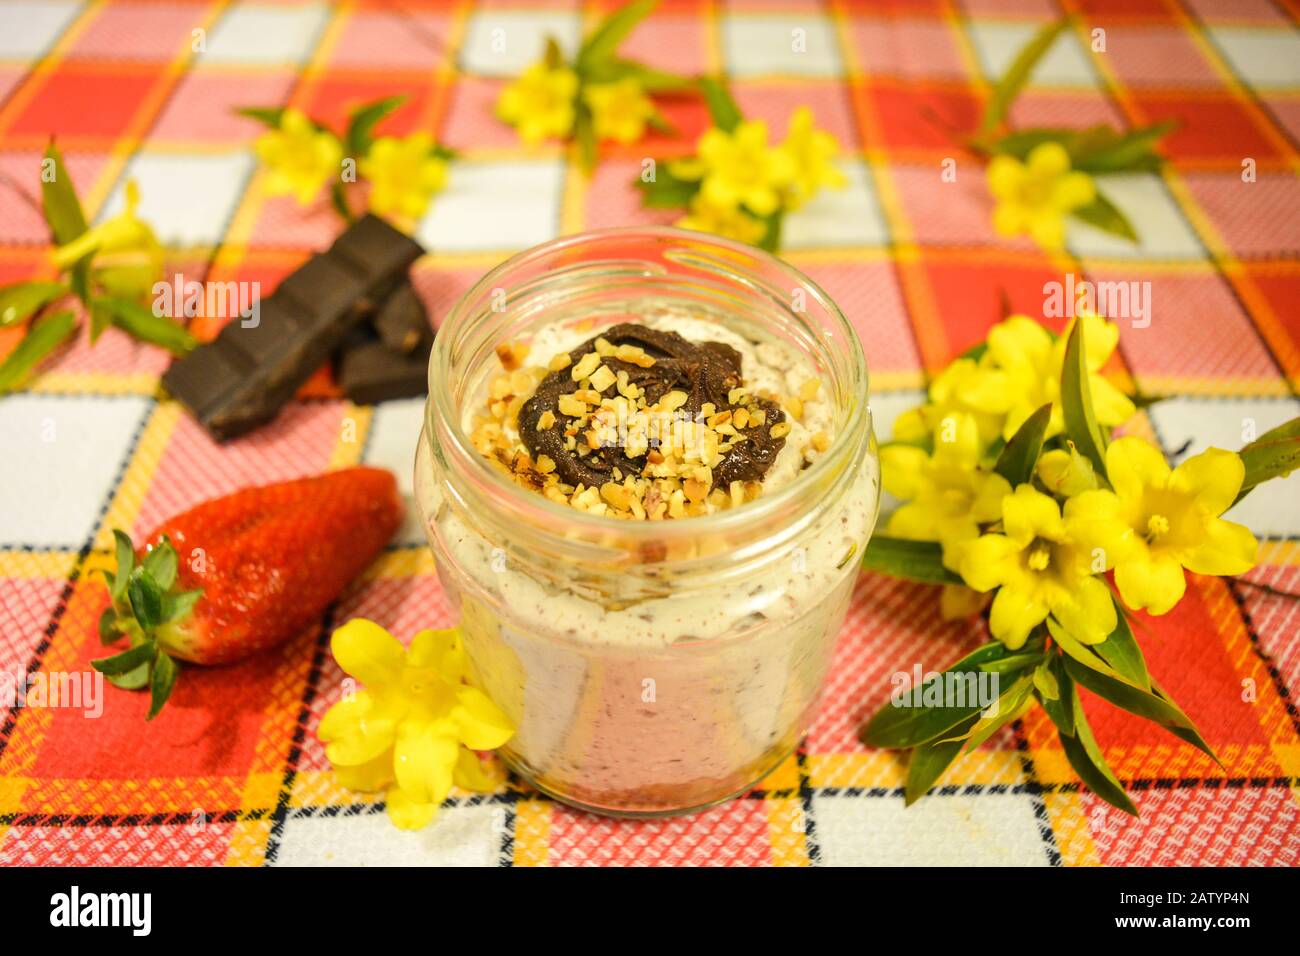 A sweet creation for wedding celebration, stracciatella cheesecake in a cup with chocolate and hazelnut decoration, cookie crumble and strawberry base Stock Photo